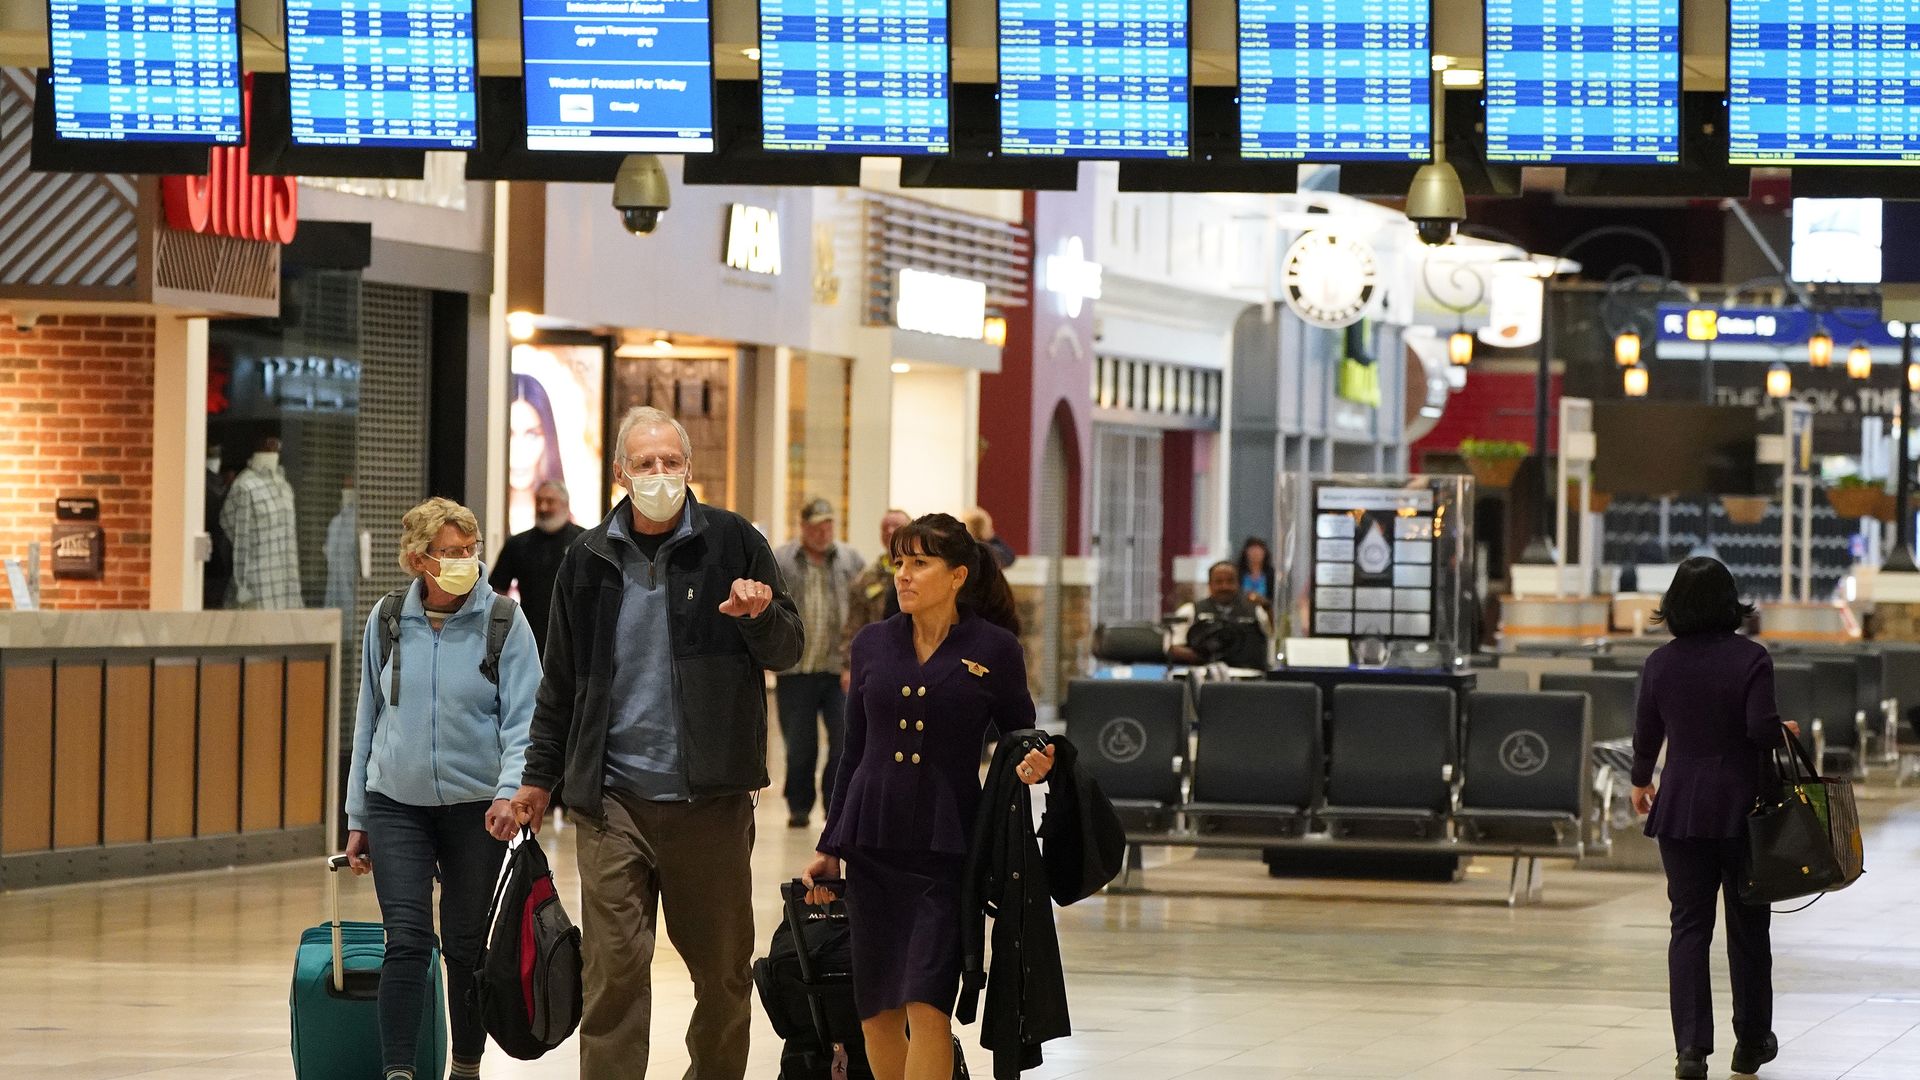 In this image, two people wearing face masks walk through an airport while a flight attendant walks next to them 